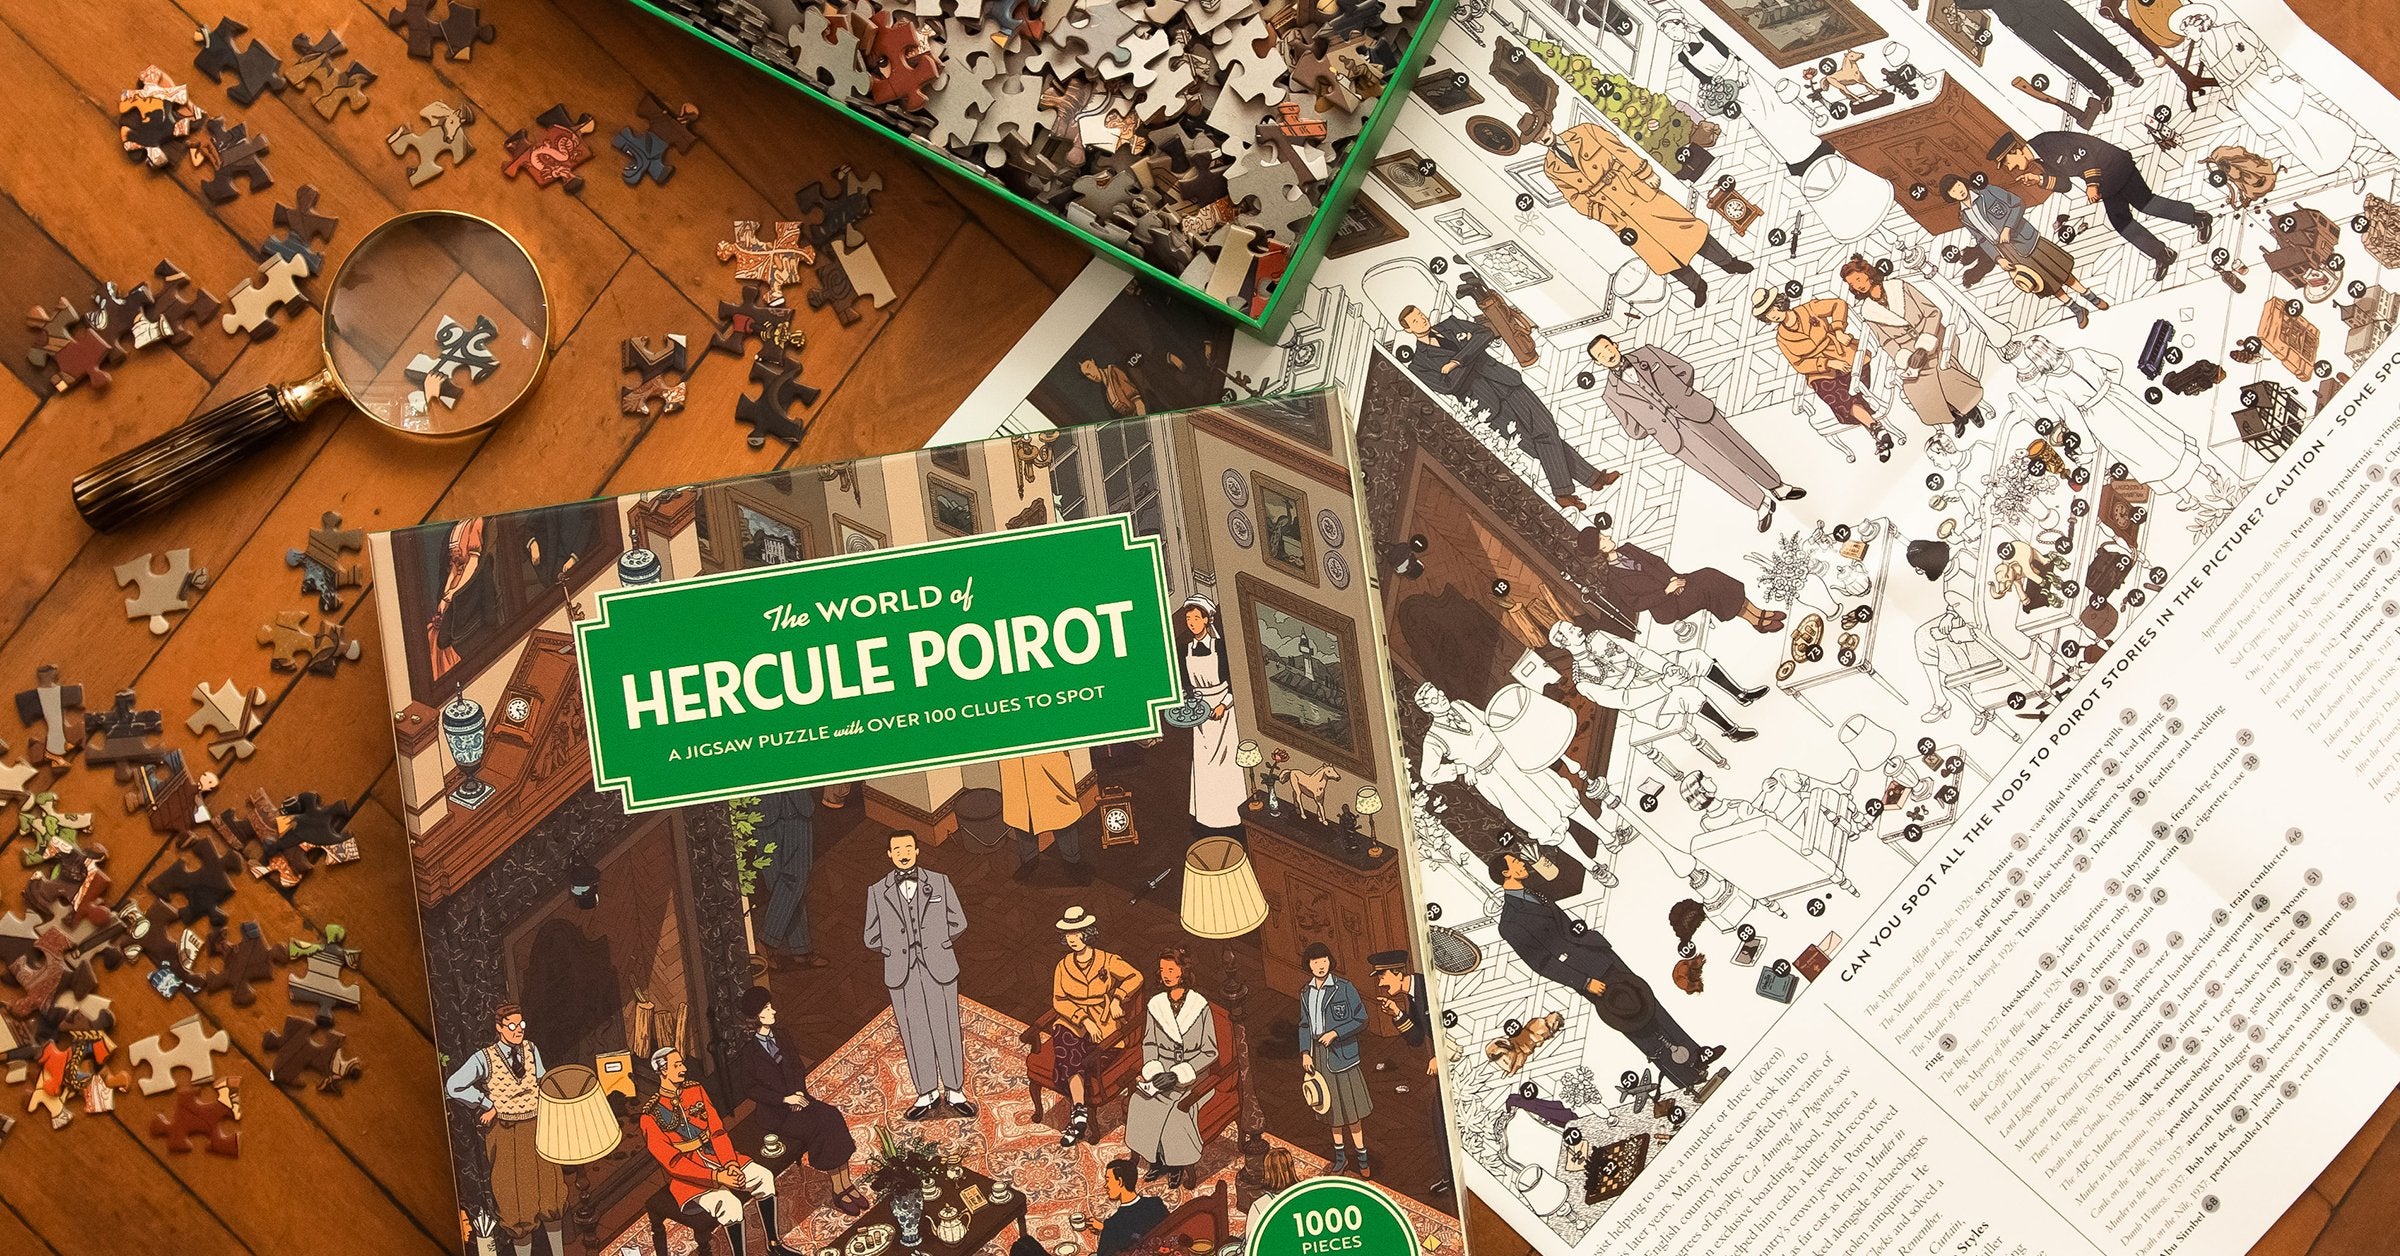 The World of Hercule Poirot : A 1000-piece Jigsaw Puzzle with over 100 Clues to Spot